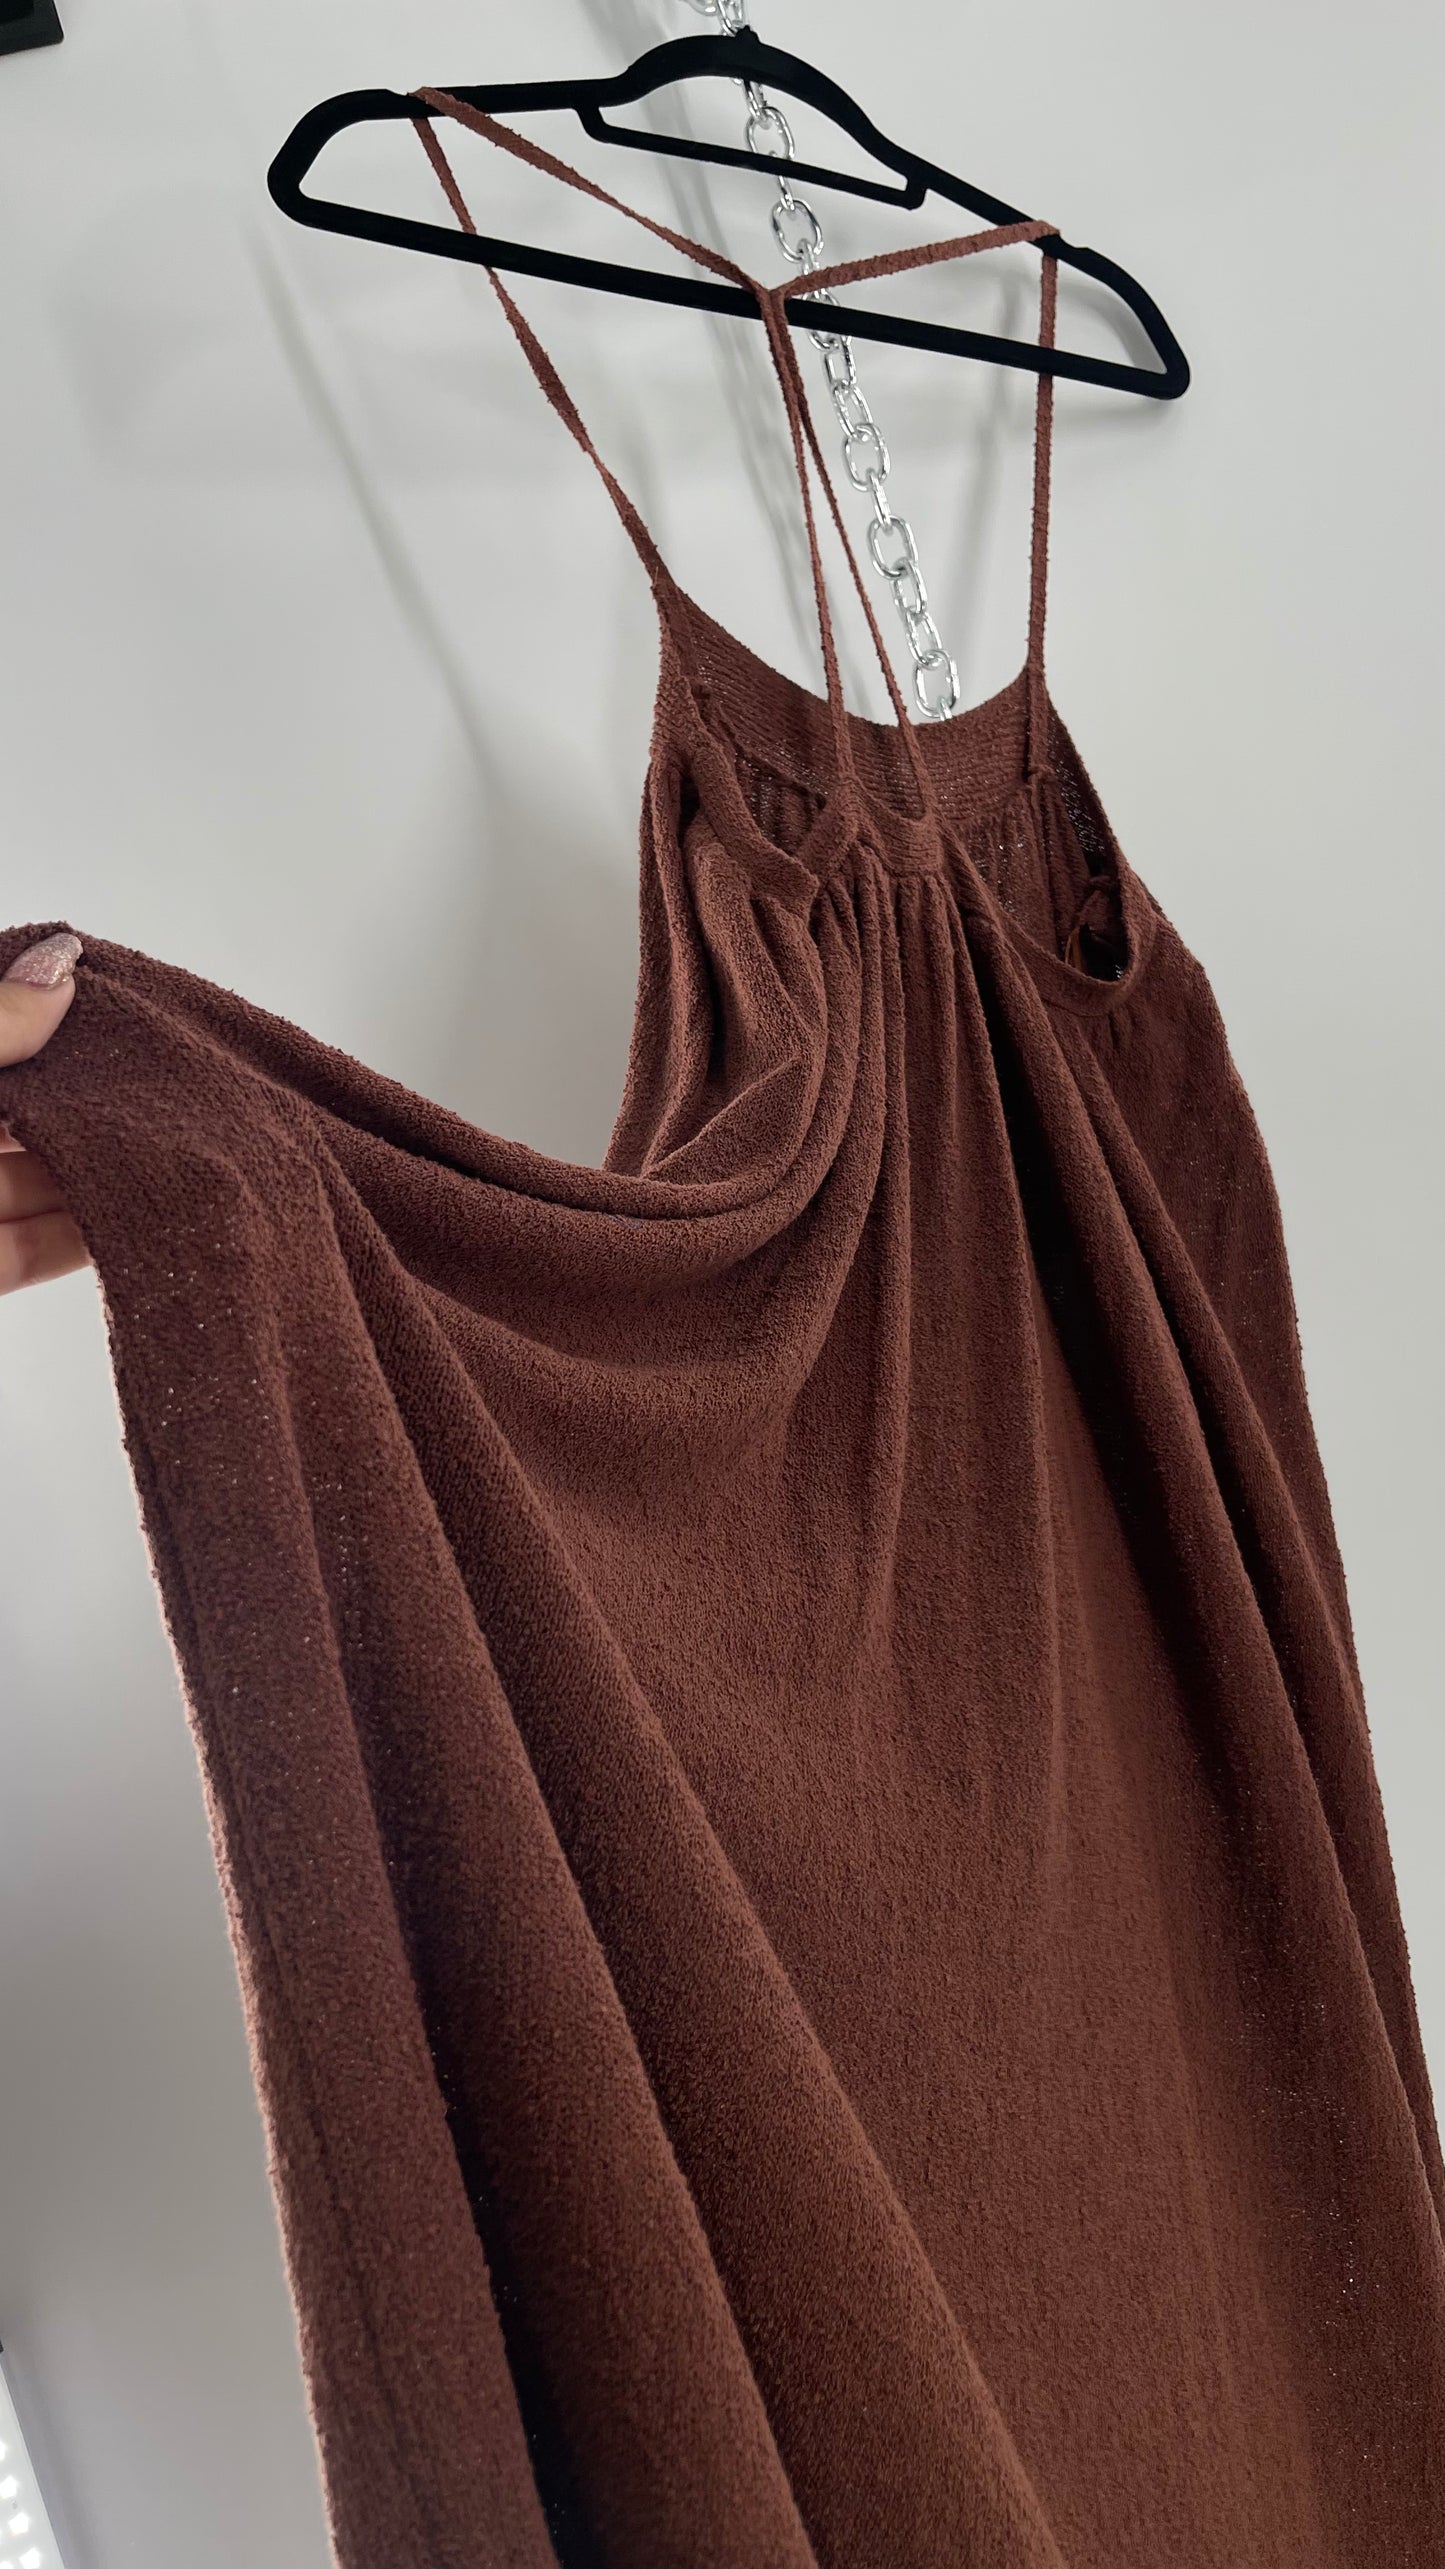 Free People Slinky Textured Brown Knit Full Length Dress (Small)